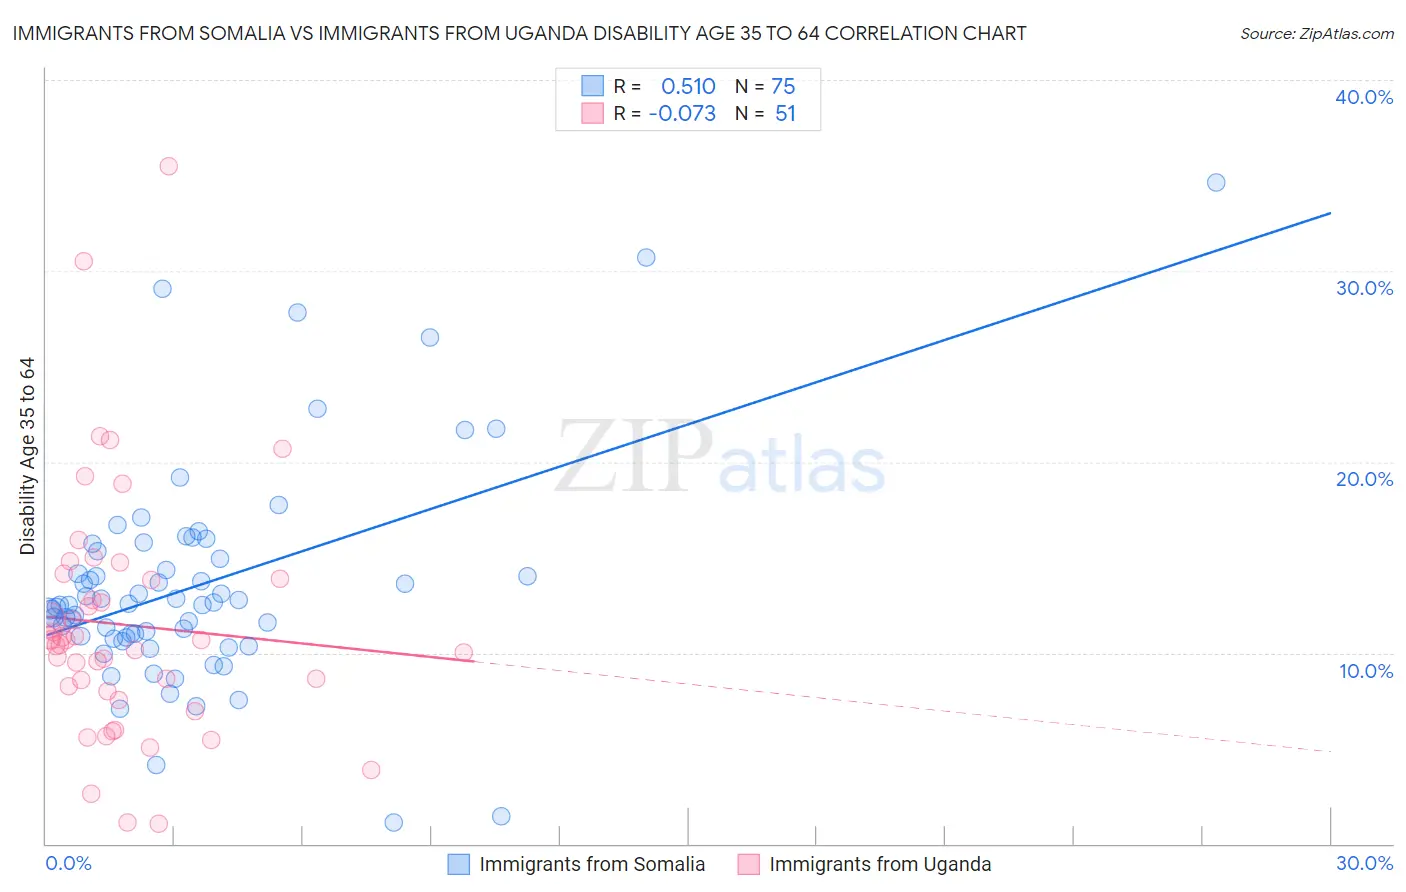 Immigrants from Somalia vs Immigrants from Uganda Disability Age 35 to 64